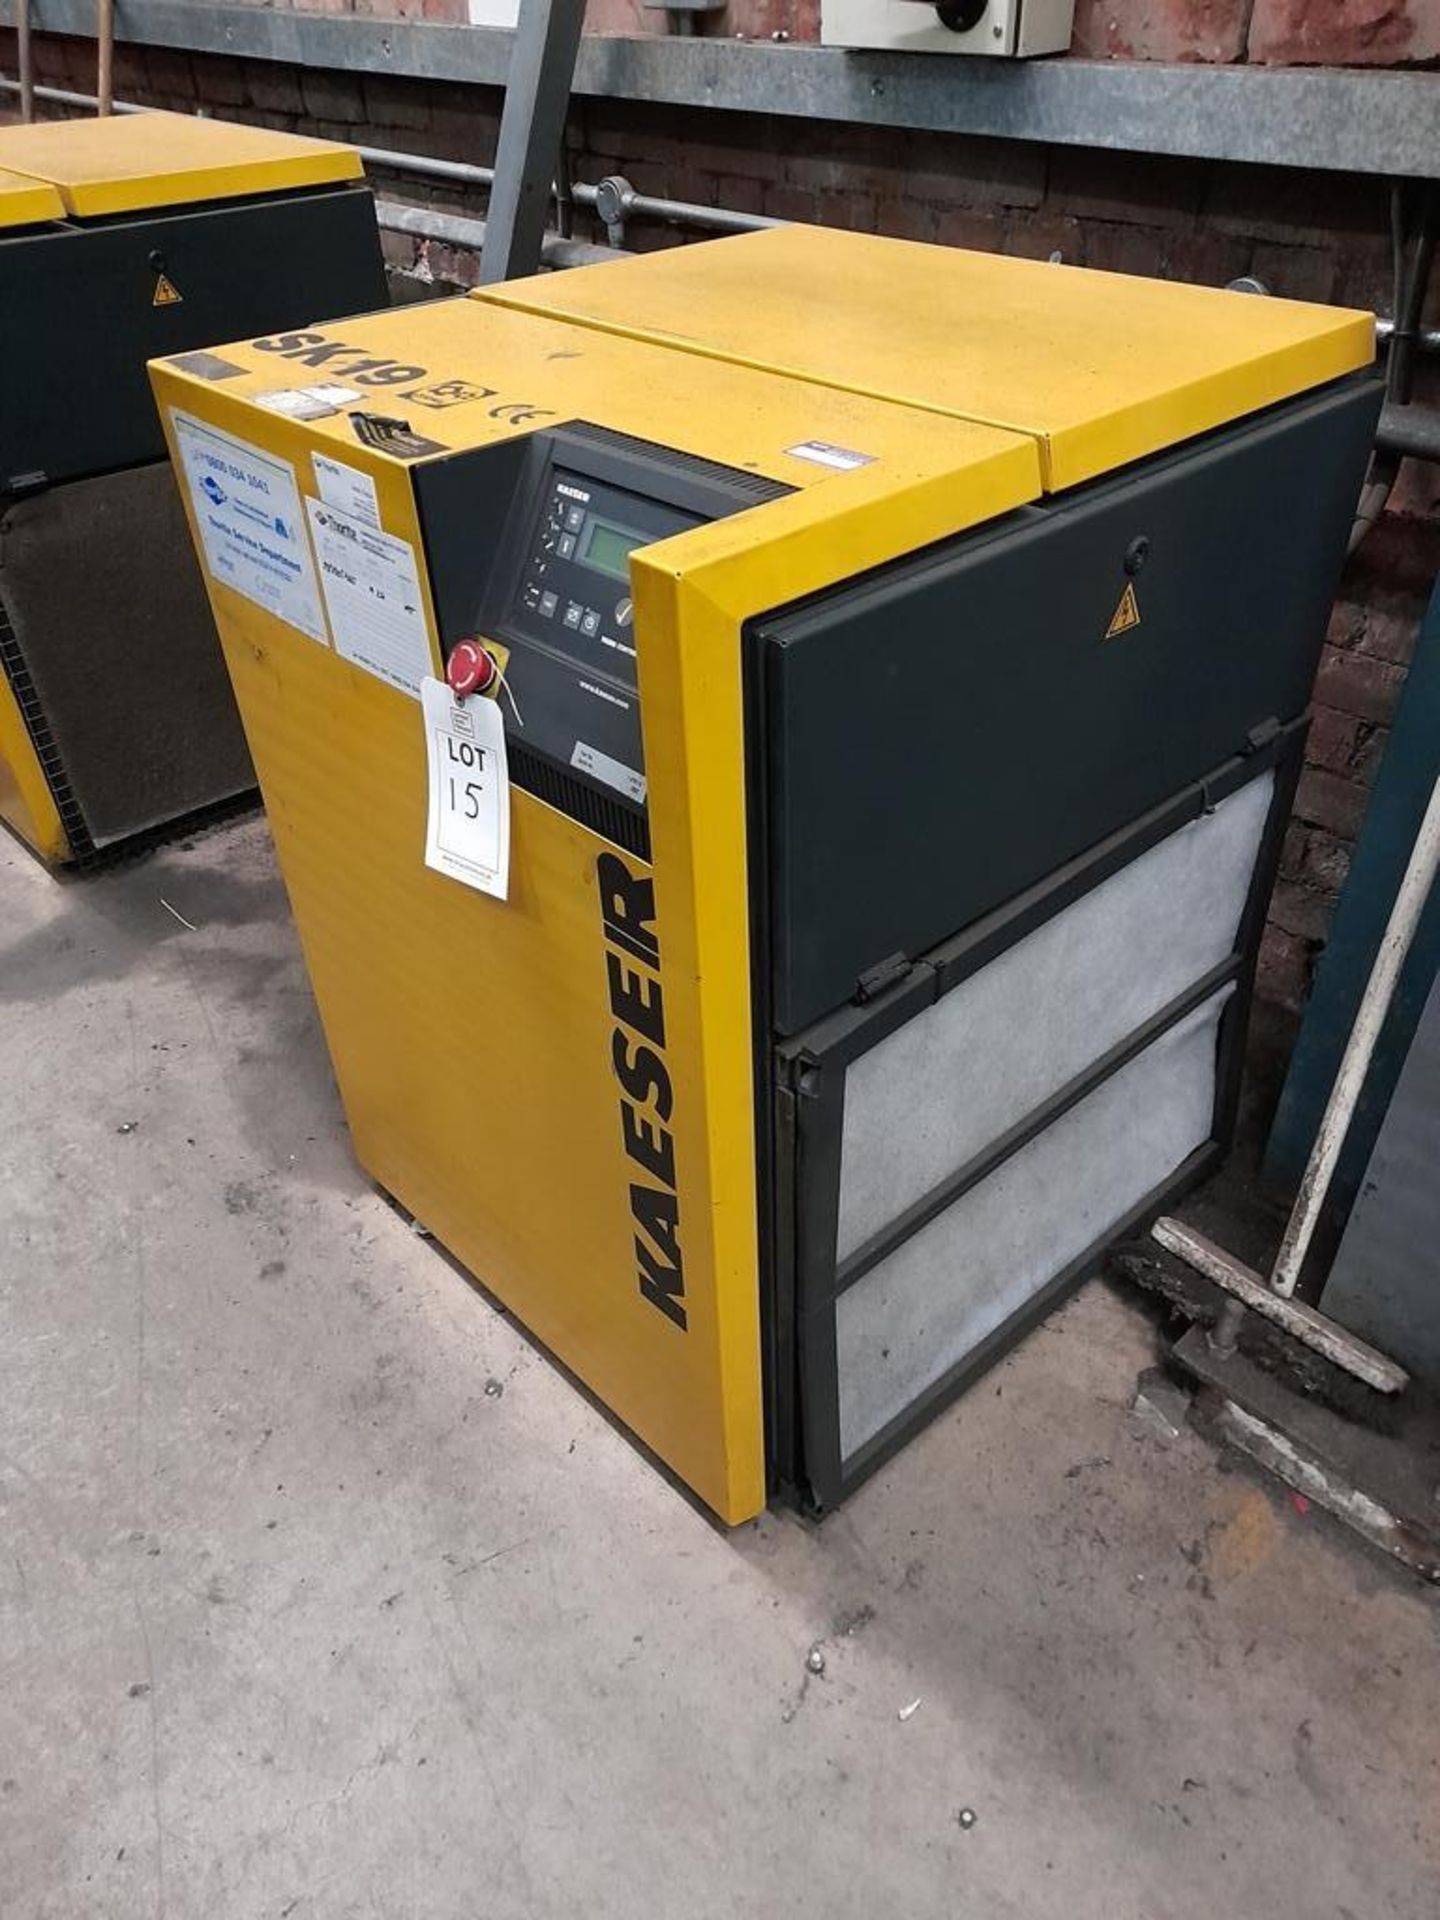 Kaeser HPC SK19 PLUSAIR packaged air compressor, Serial no. 1001. NB: The purchaser must ensure this